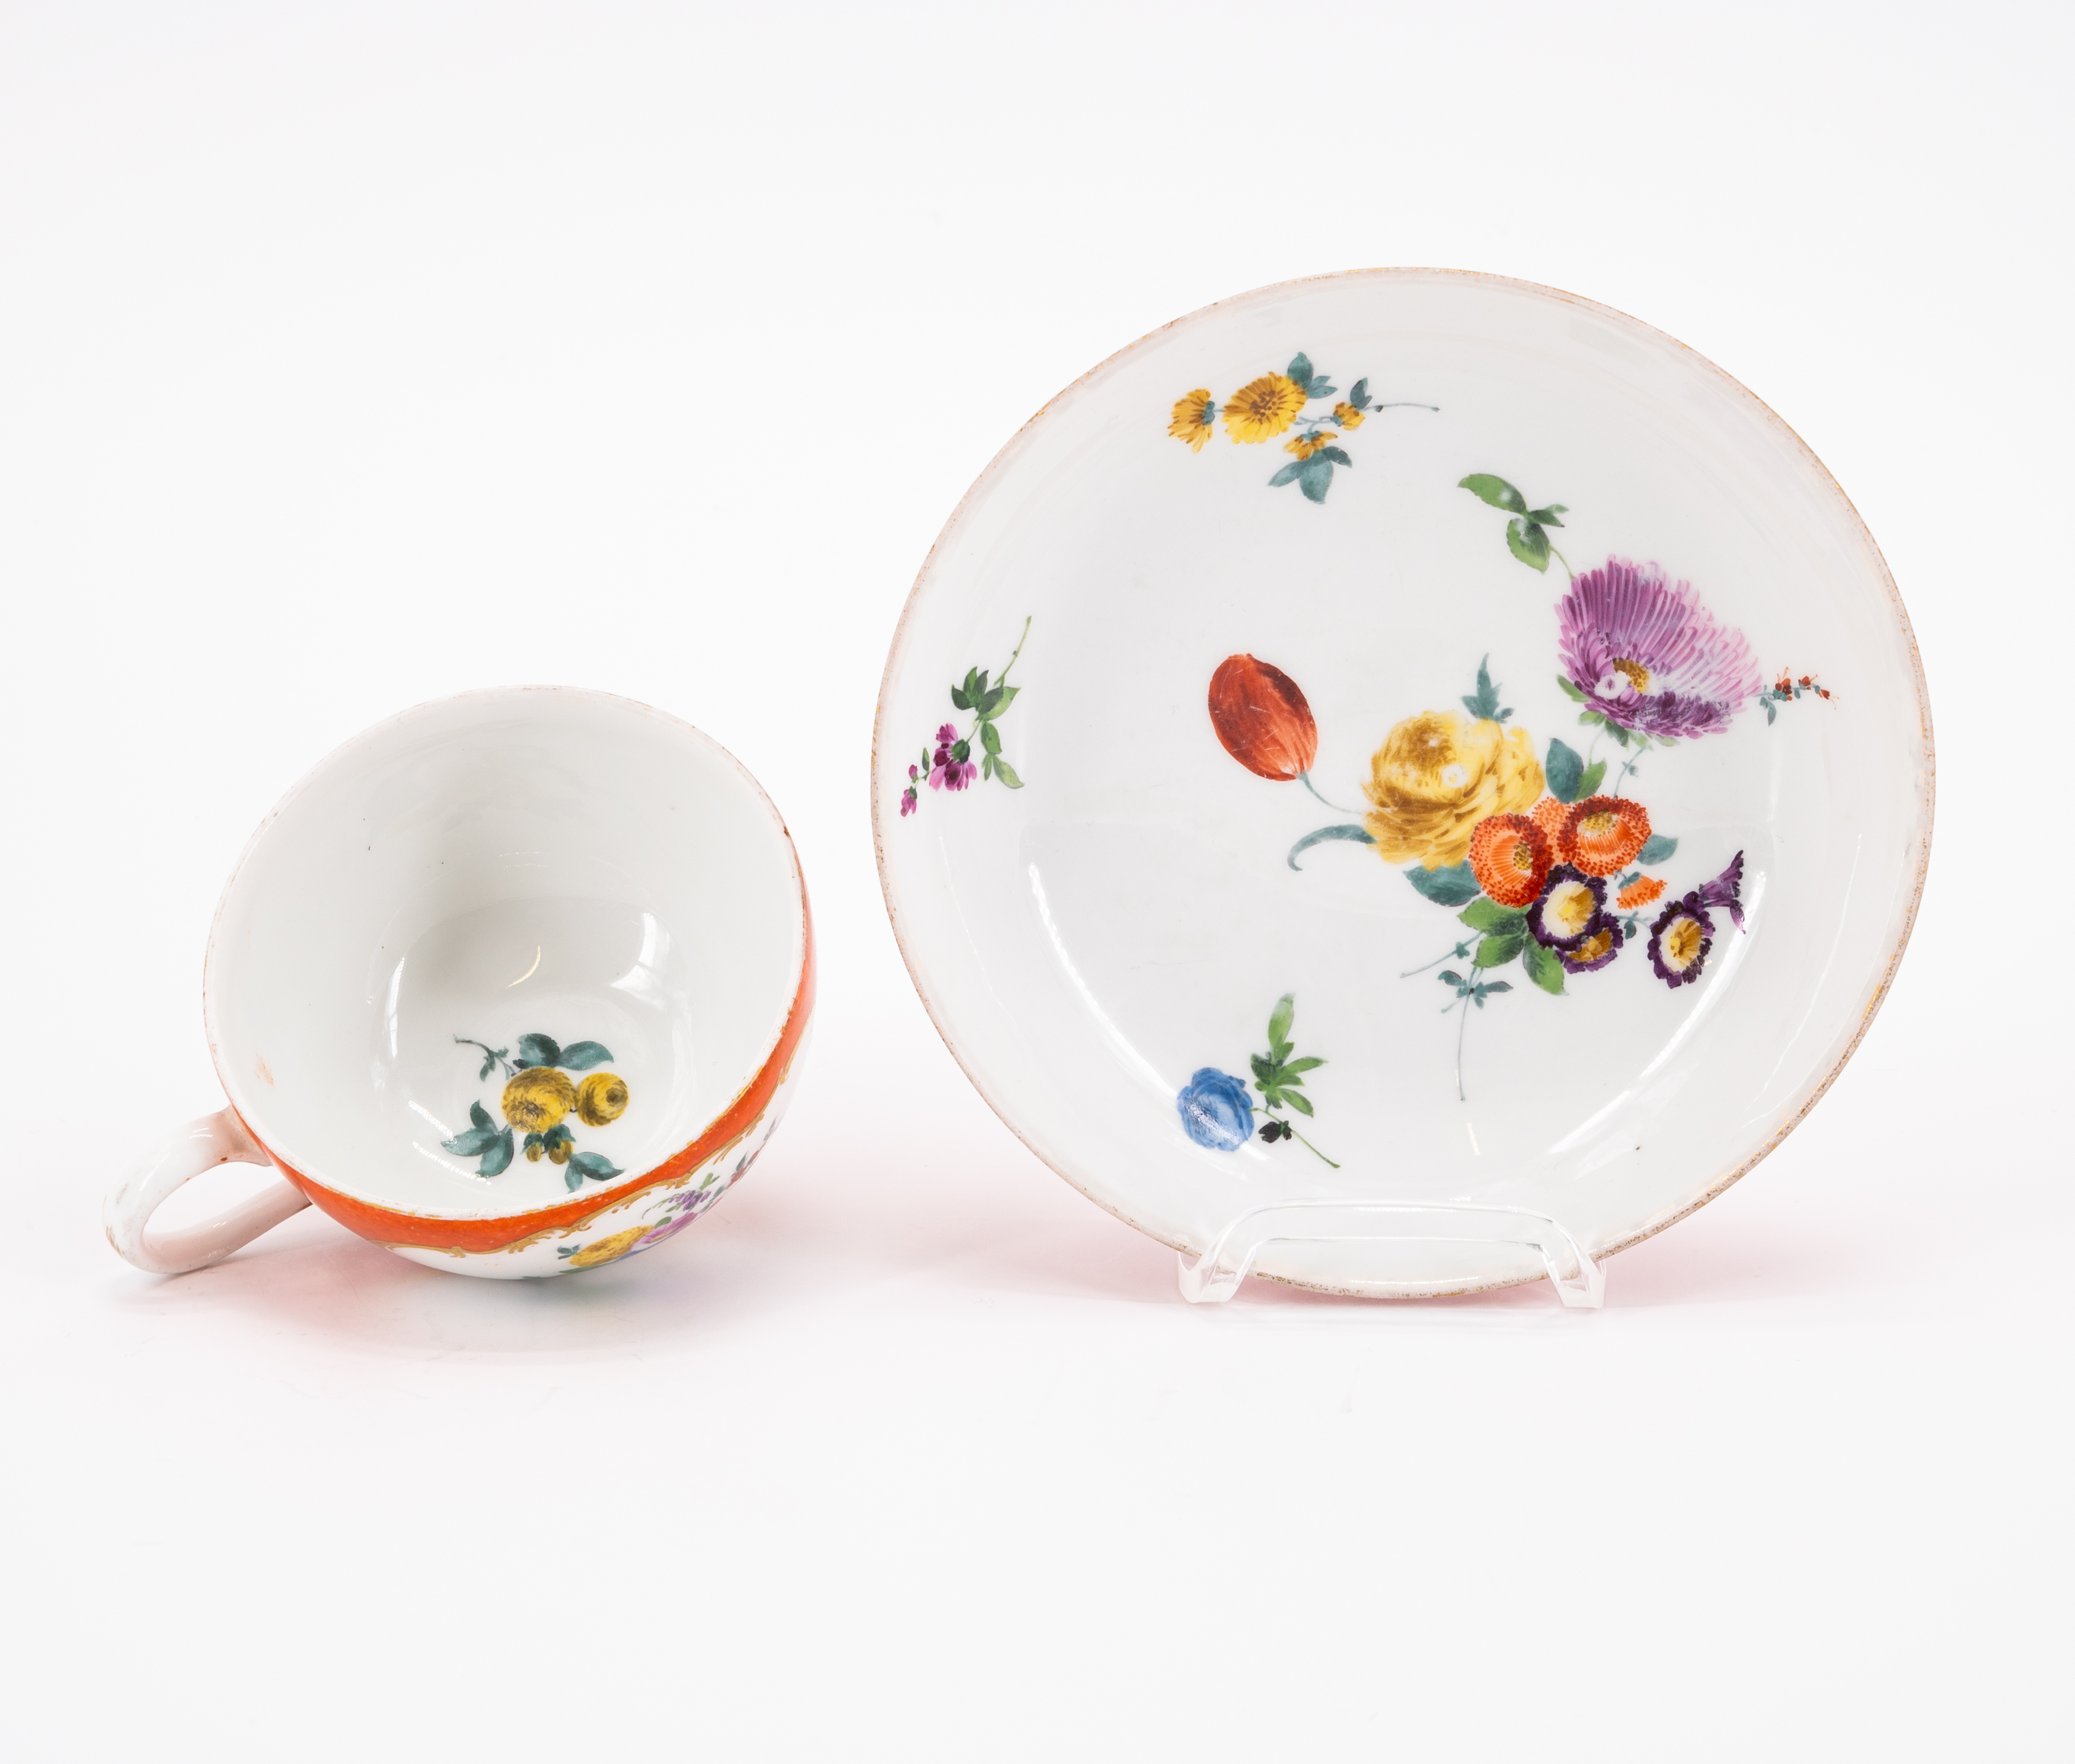 TWO PORCELAIN CUPS AND SAUCERS WITH YELLOW AND ORANGE COLOURED GROUND AS WELL AS FLORAL DECOR - Image 10 of 11